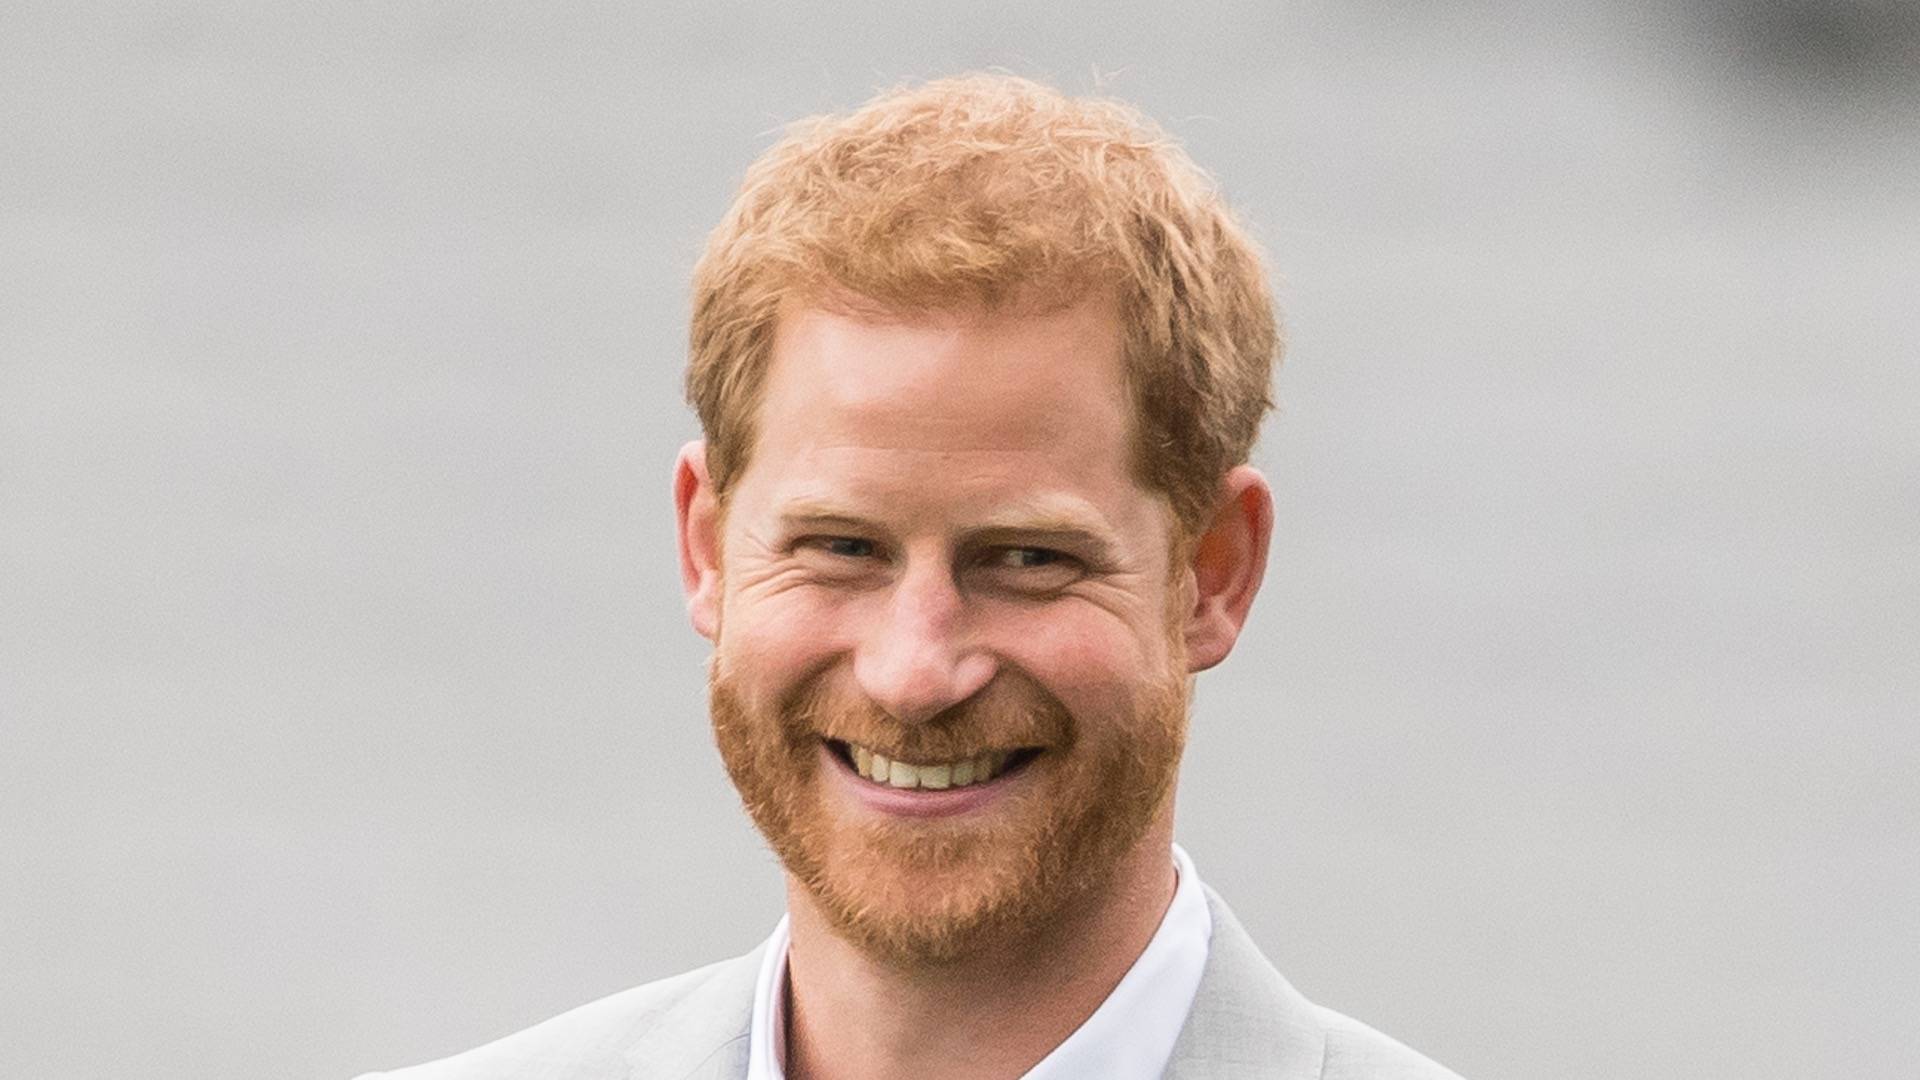 Prince harry smiling in front of grey background